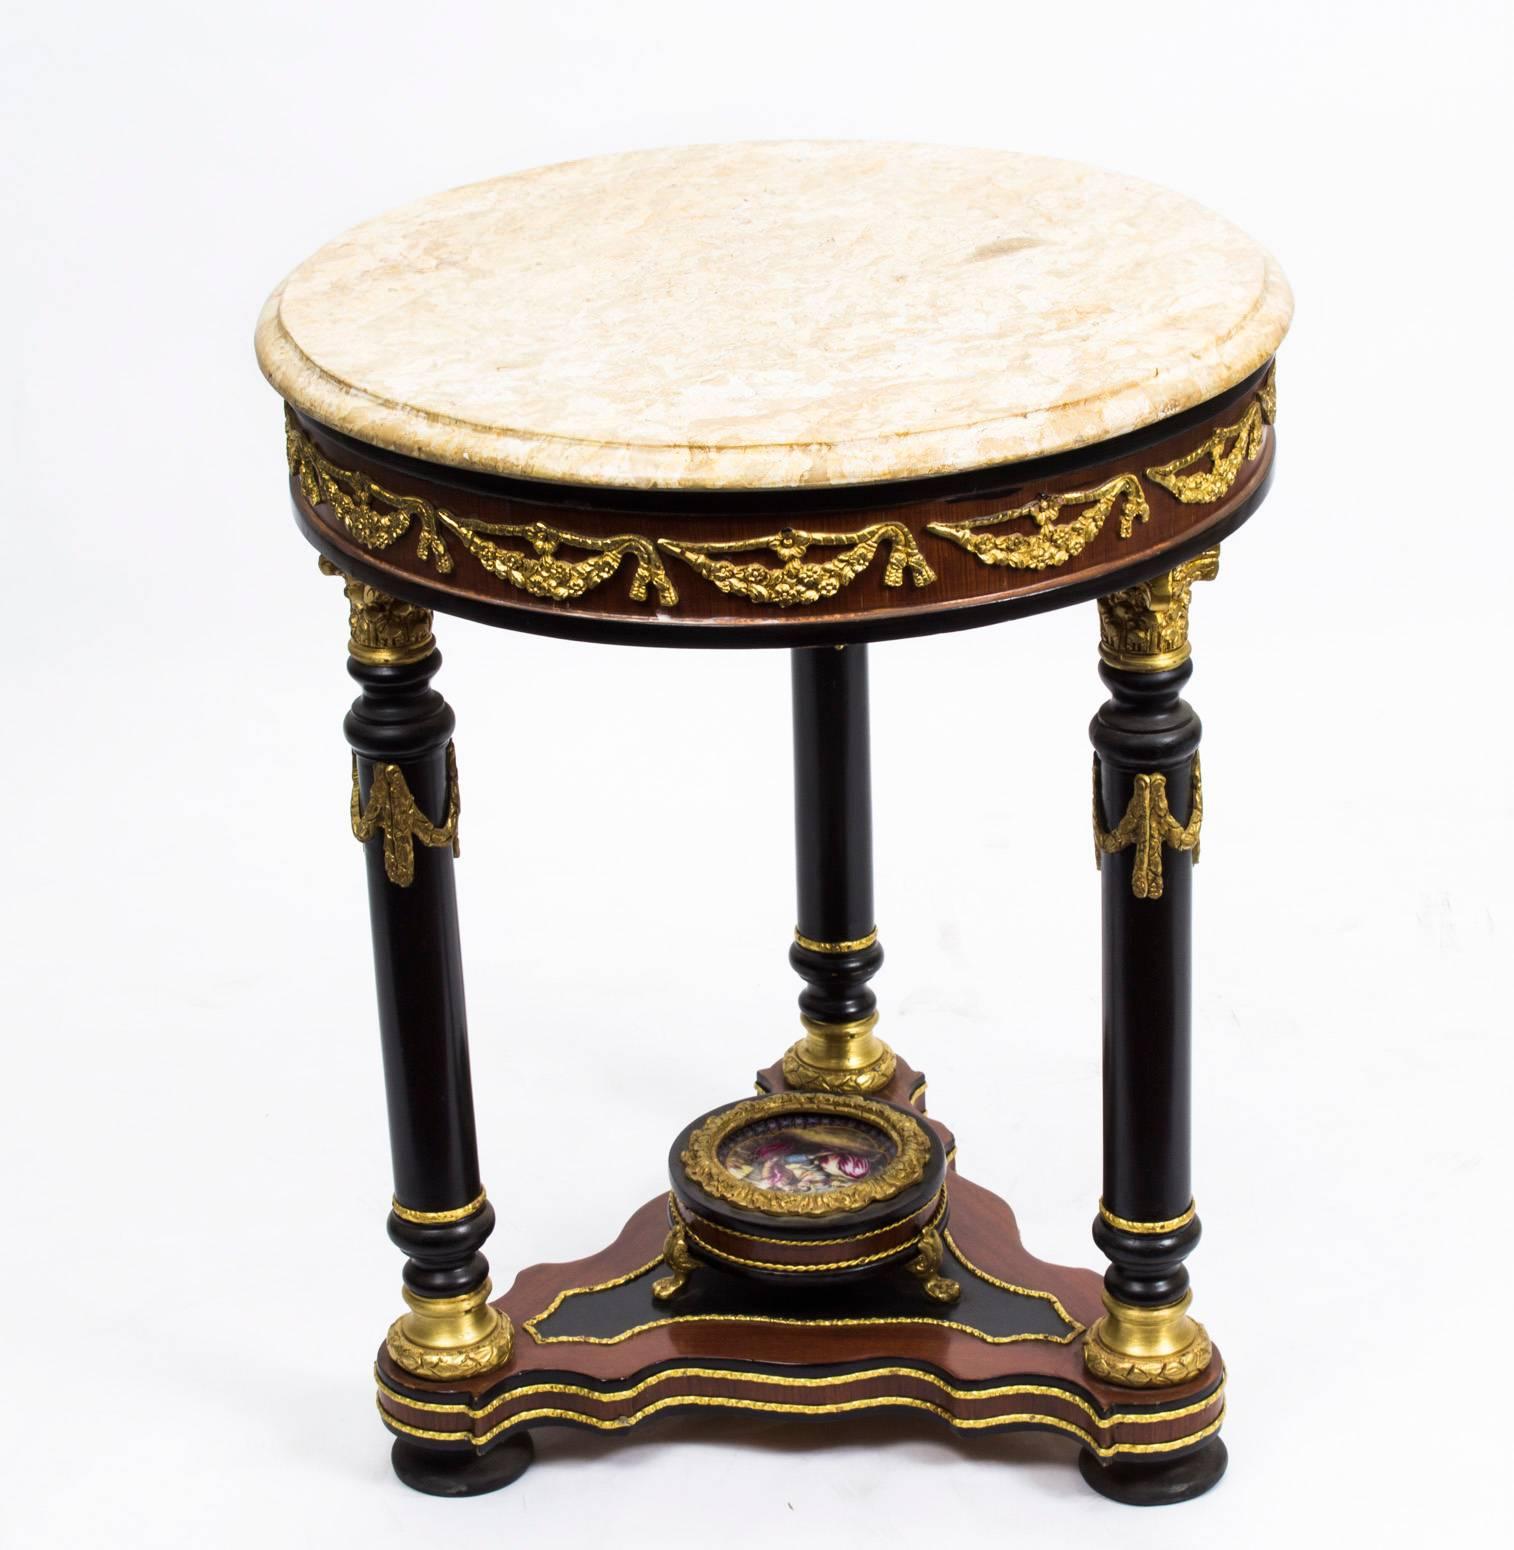 A stunning and unusual pair of French Louis Revival occasional tables.

These gorgeous pieces were inspired by the Louis XV style and date from the second half of the 20th Century.

Elaborately detailed, they feature ebonised legs, exquisite